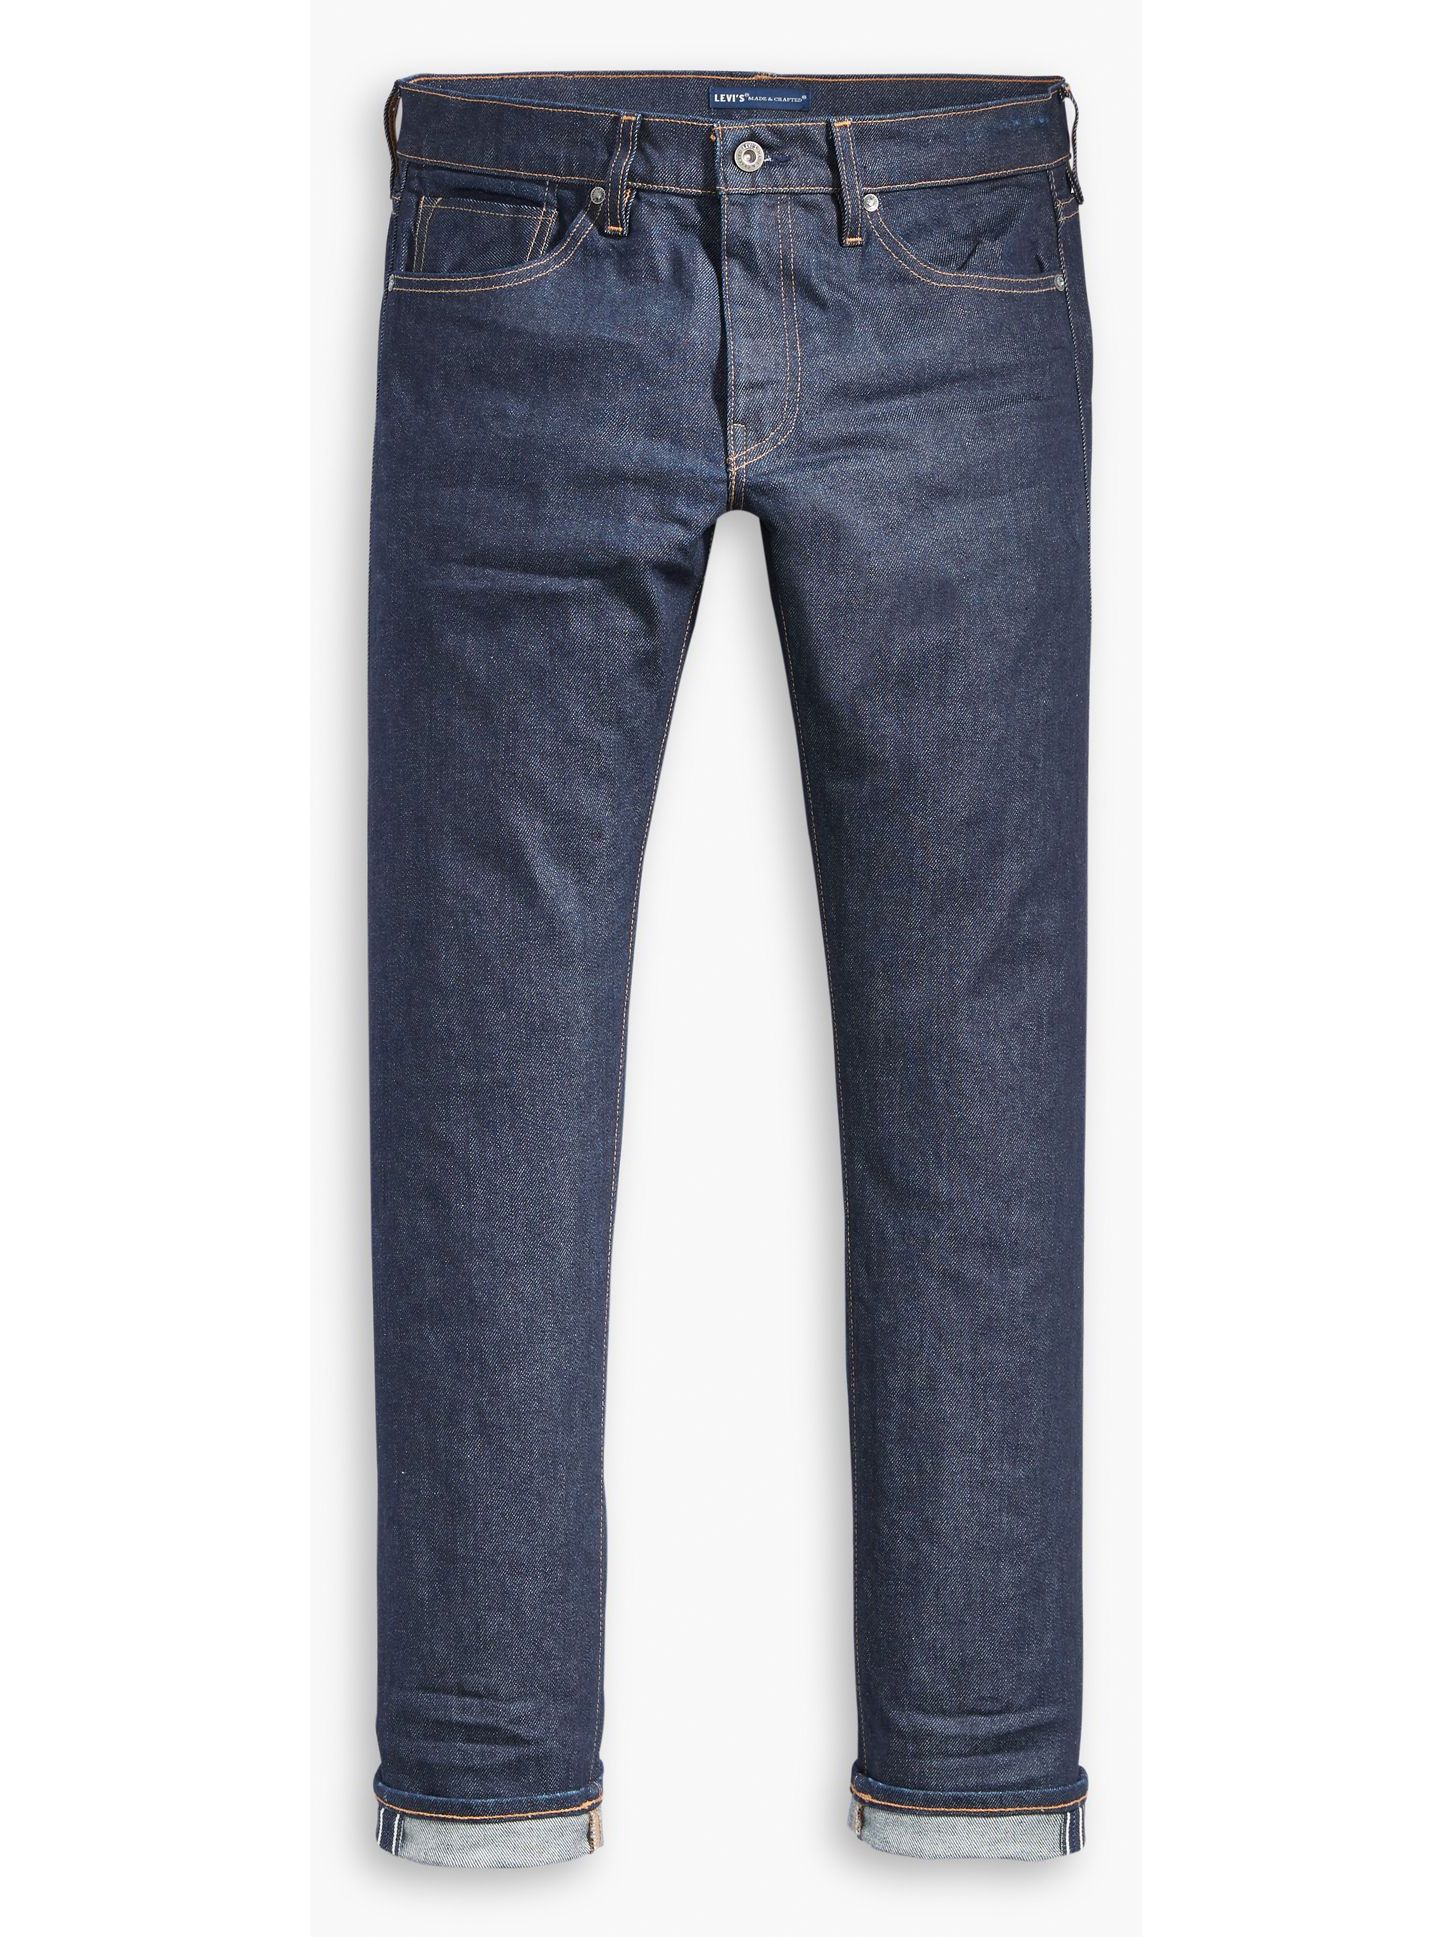 Levi's® Made & Crafted® LMC 511 Slim Fit Jeans in Resin Rinse Stretch ...